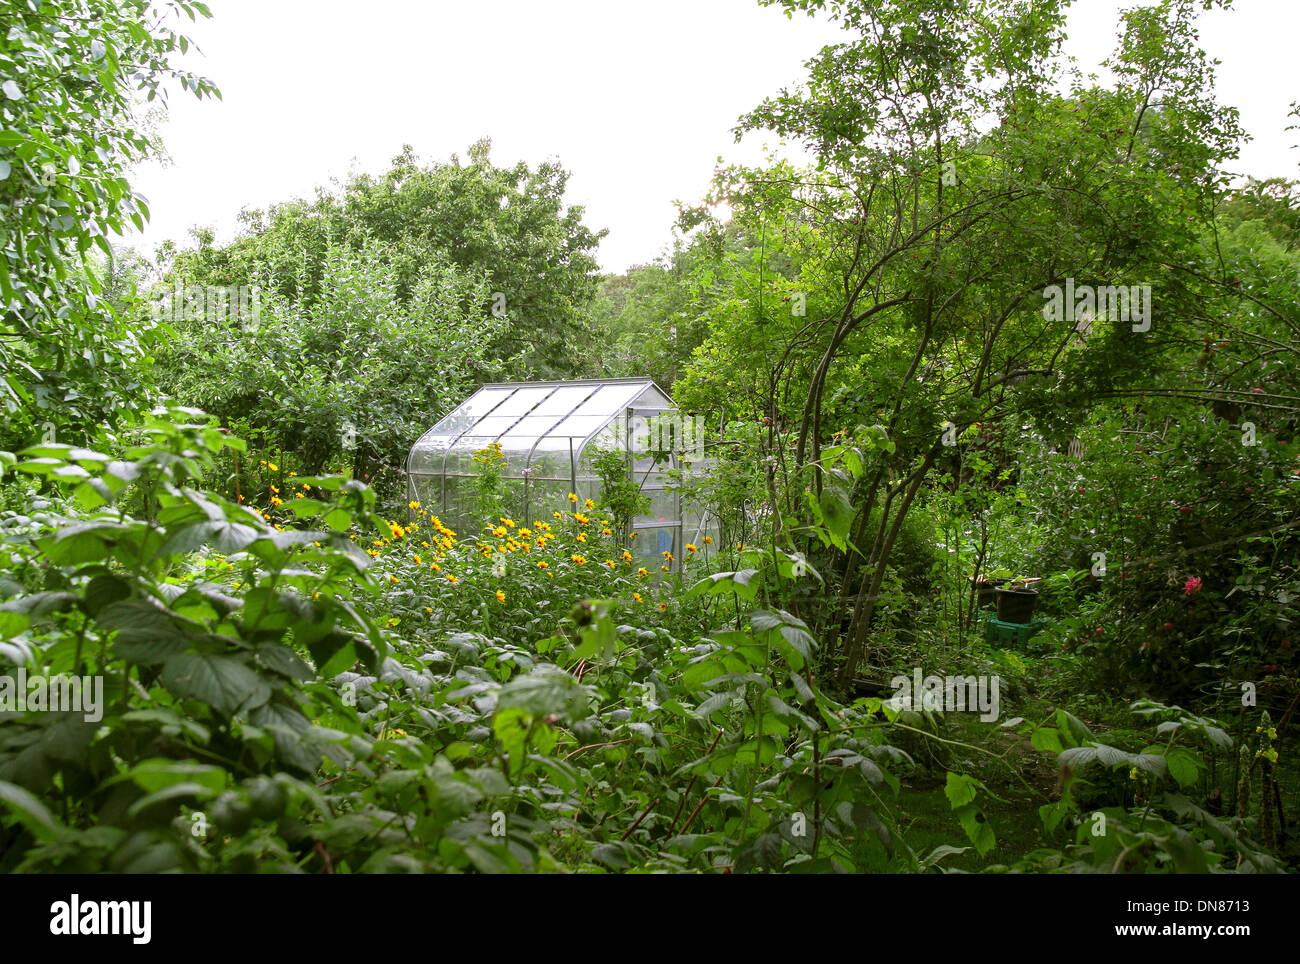 A green house lost in an overgrown garden Stock Photo